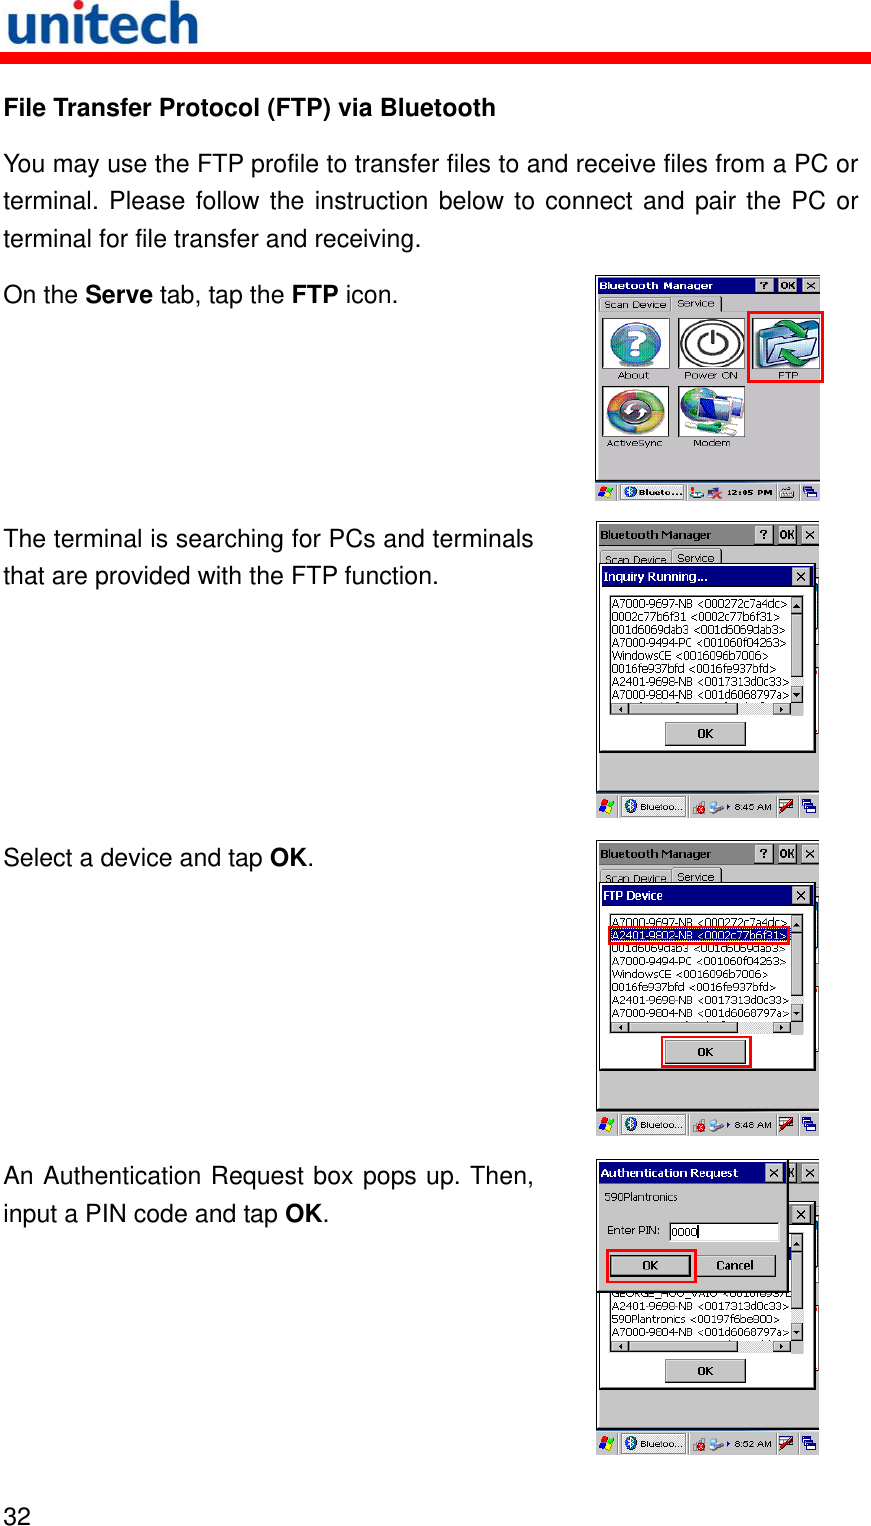   32  File Transfer Protocol (FTP) via Bluetooth You may use the FTP profile to transfer files to and receive files from a PC or terminal. Please follow the instruction below to connect and pair the PC or terminal for file transfer and receiving.   On the Serve tab, tap the FTP icon.  The terminal is searching for PCs and terminals that are provided with the FTP function.  Select a device and tap OK.  An Authentication Request box pops up. Then, input a PIN code and tap OK.  